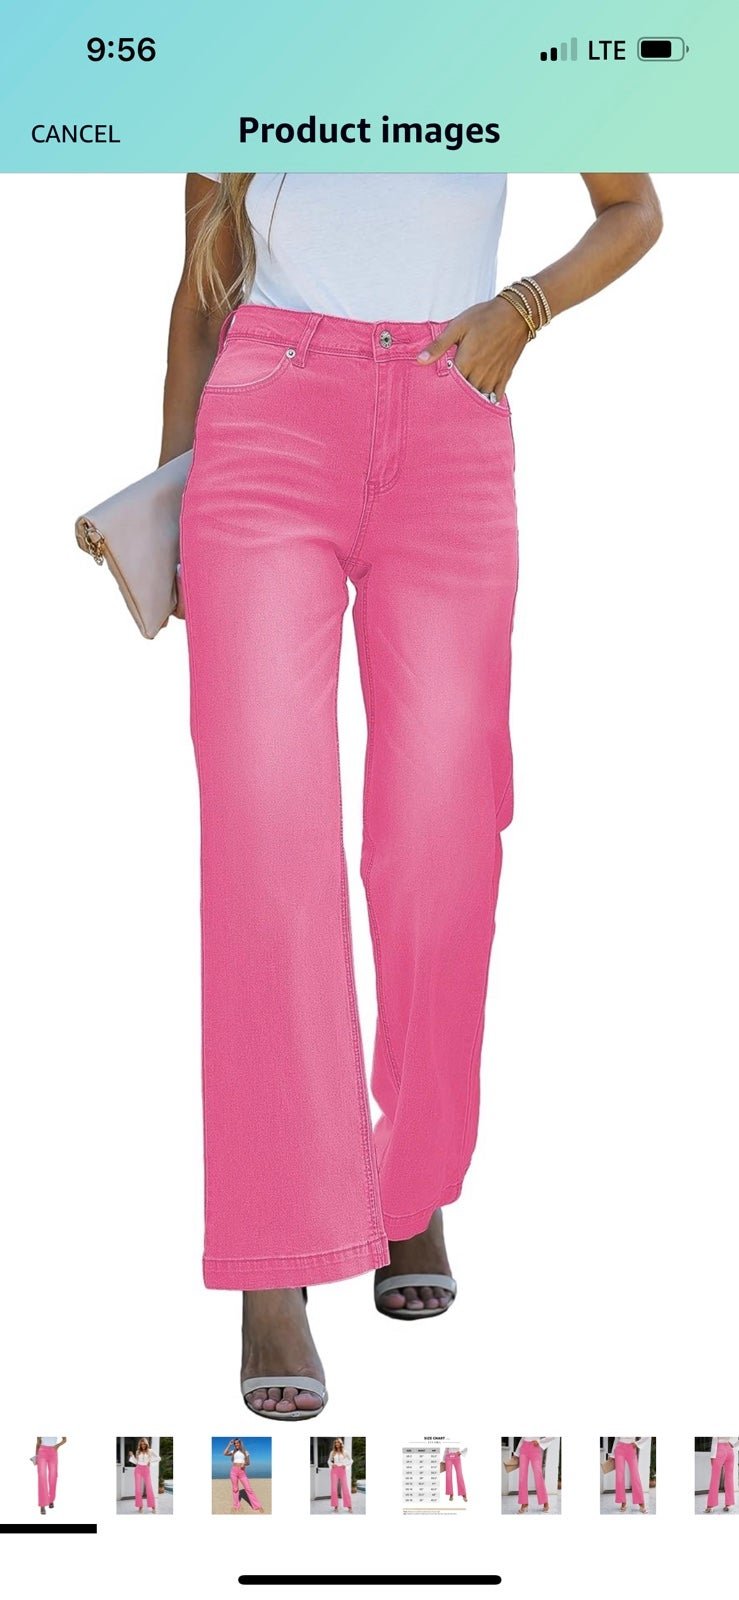 High quality New Pink Women´s High Waisted Flare Jeans Frayed Raw Hem Bell Bottom Denim Pants kG82f2x8Q Wholesale